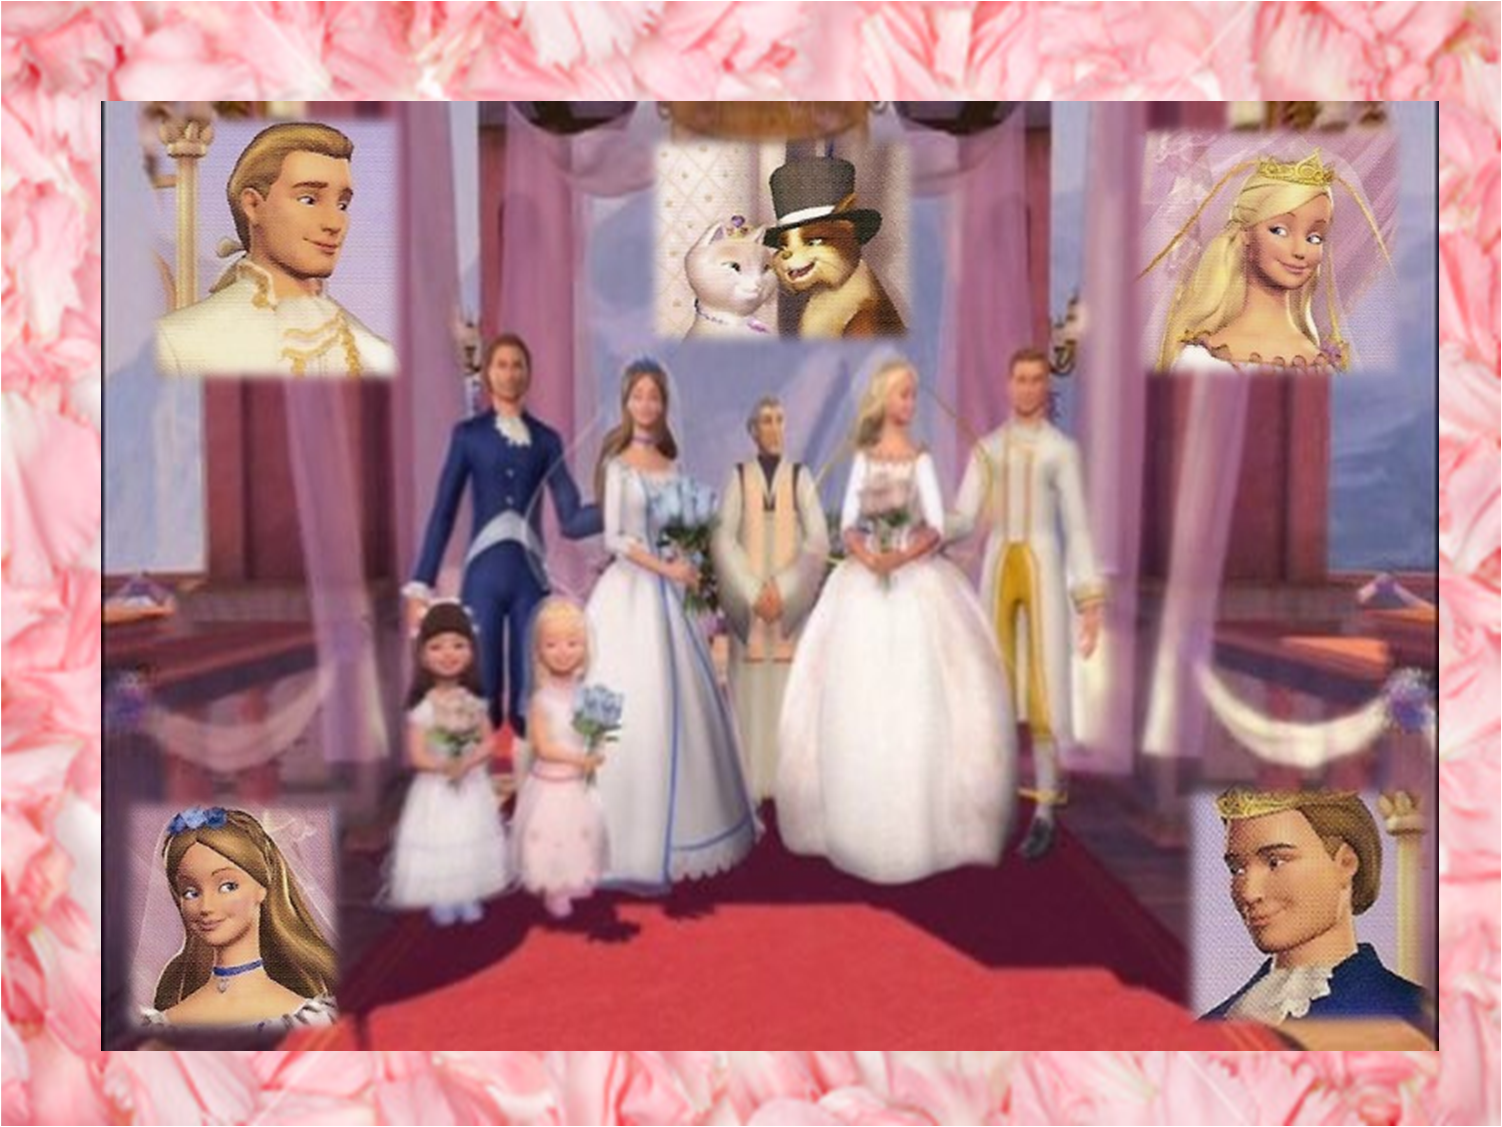 barbie as the princess and the pauper by coolgirl15 Movies Photo